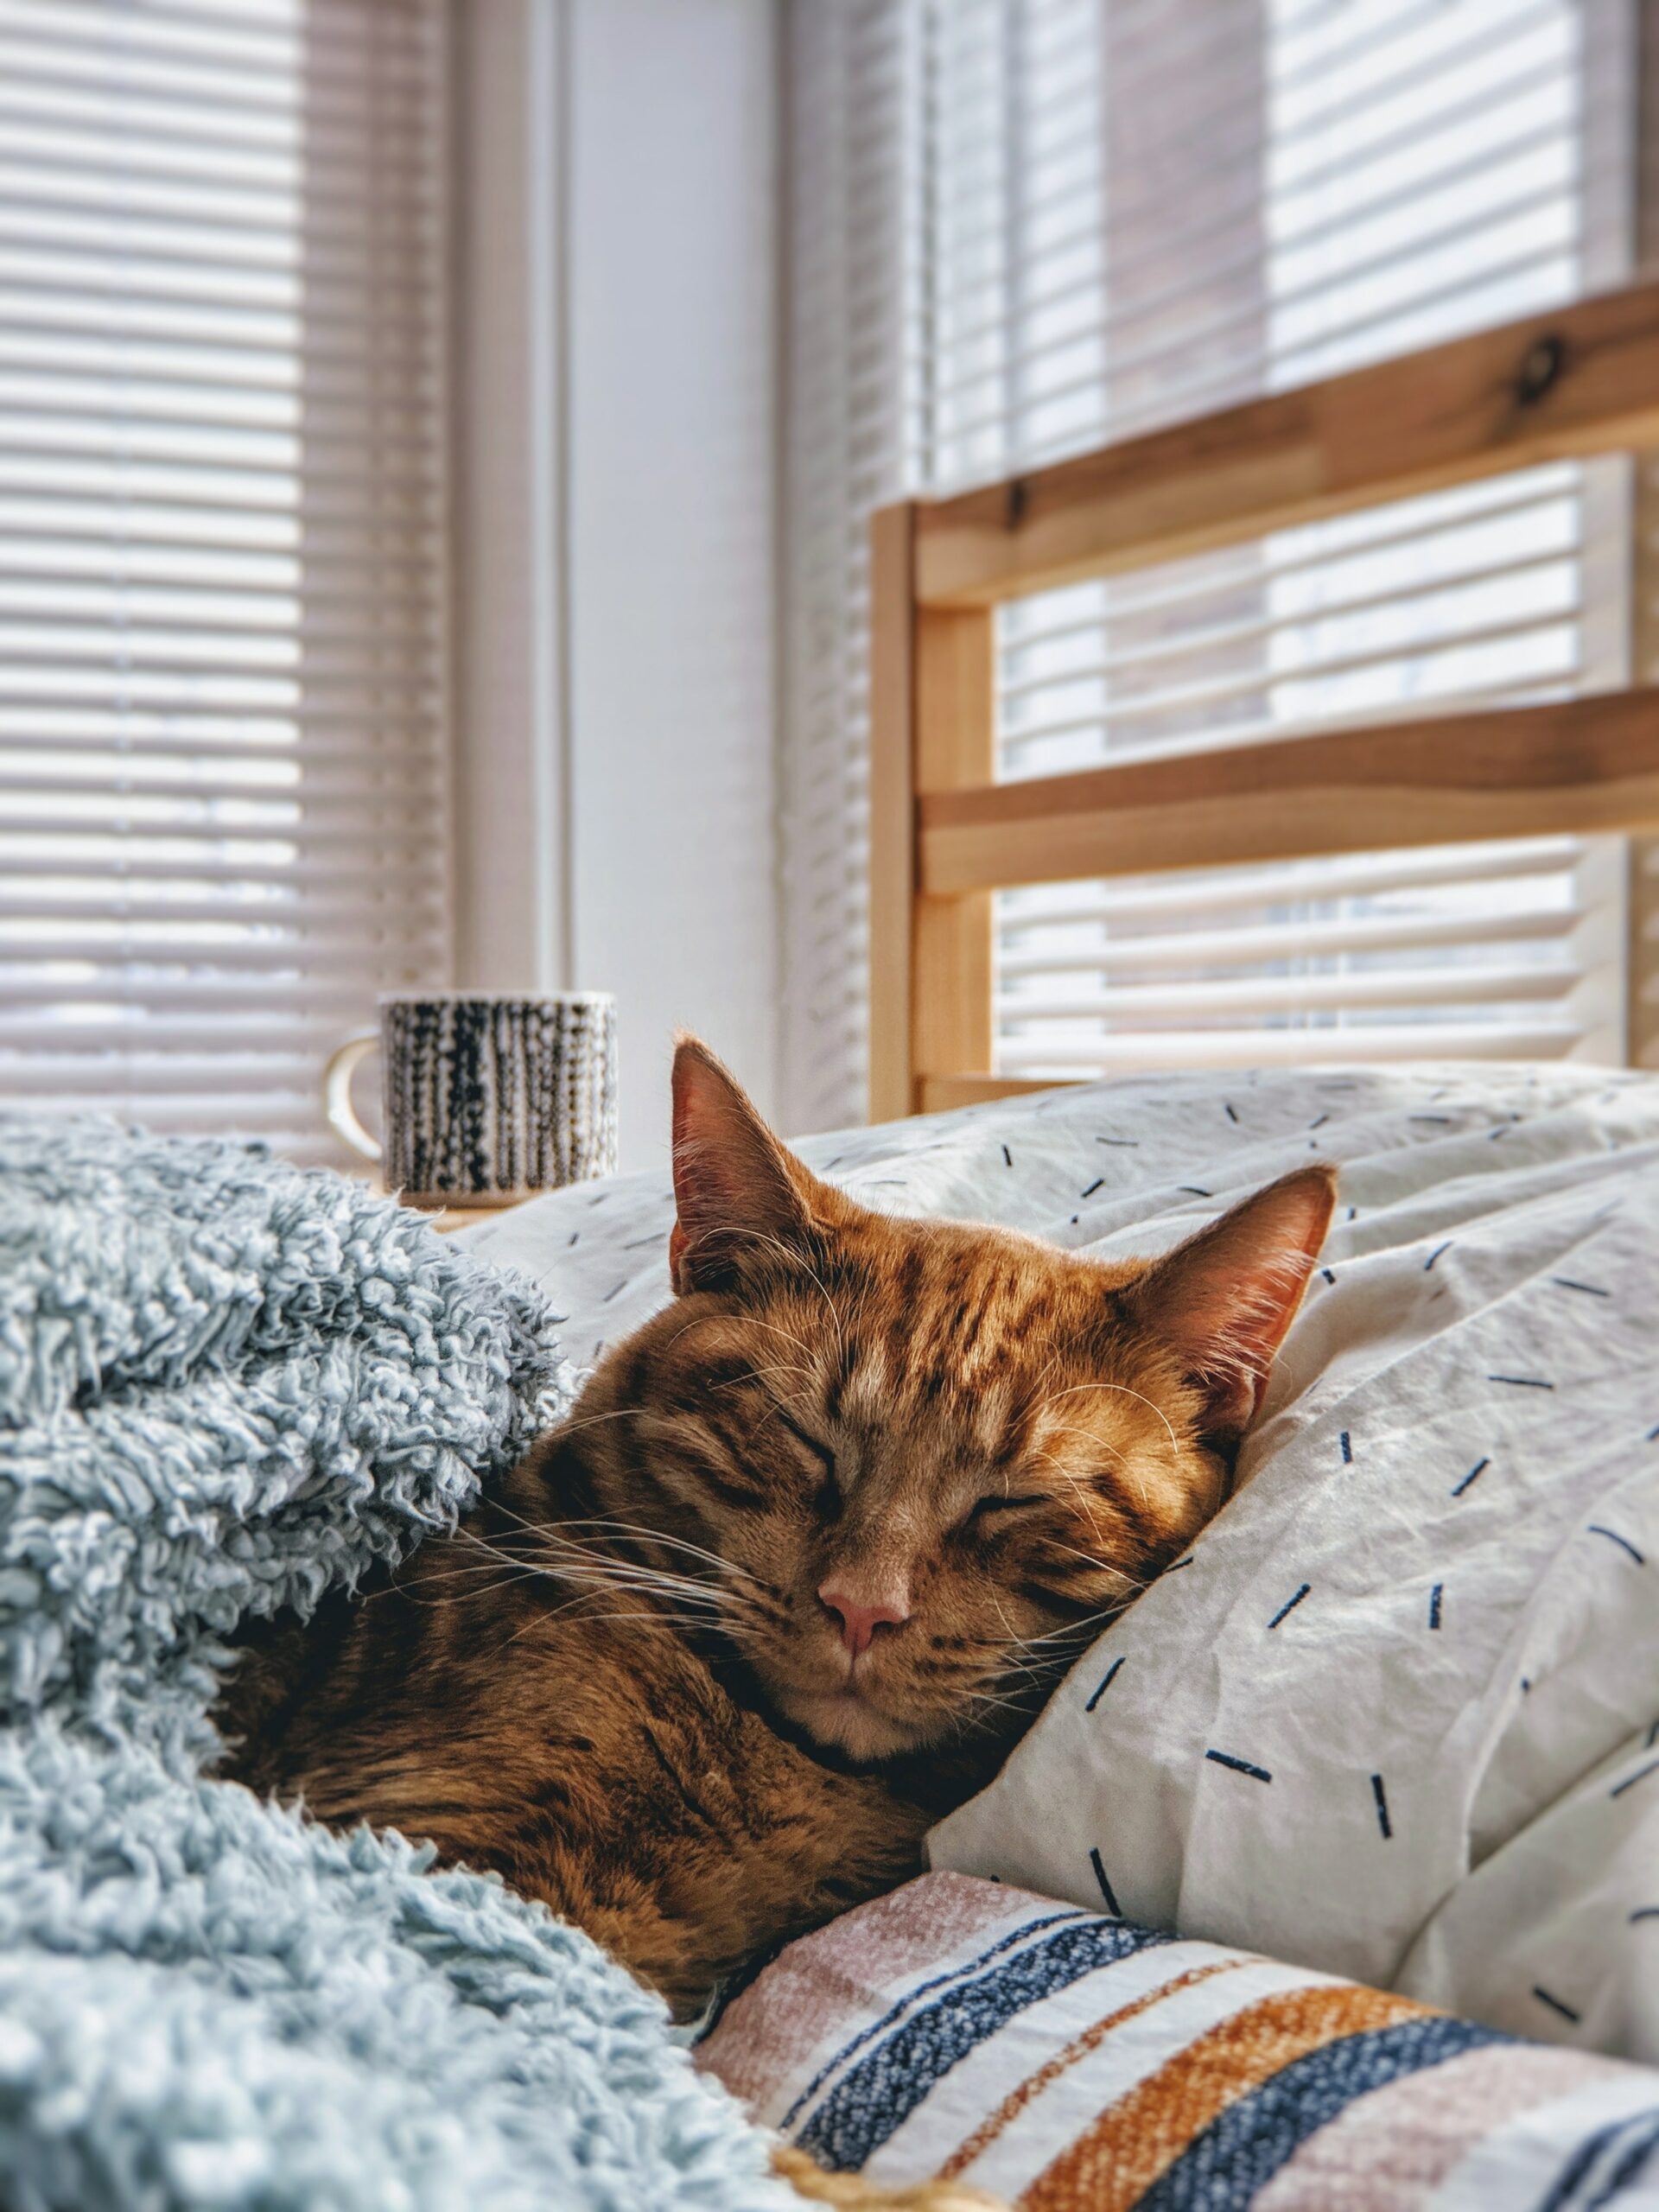 orange tabby cat snuggled in bed, under a blanket, head on pillow